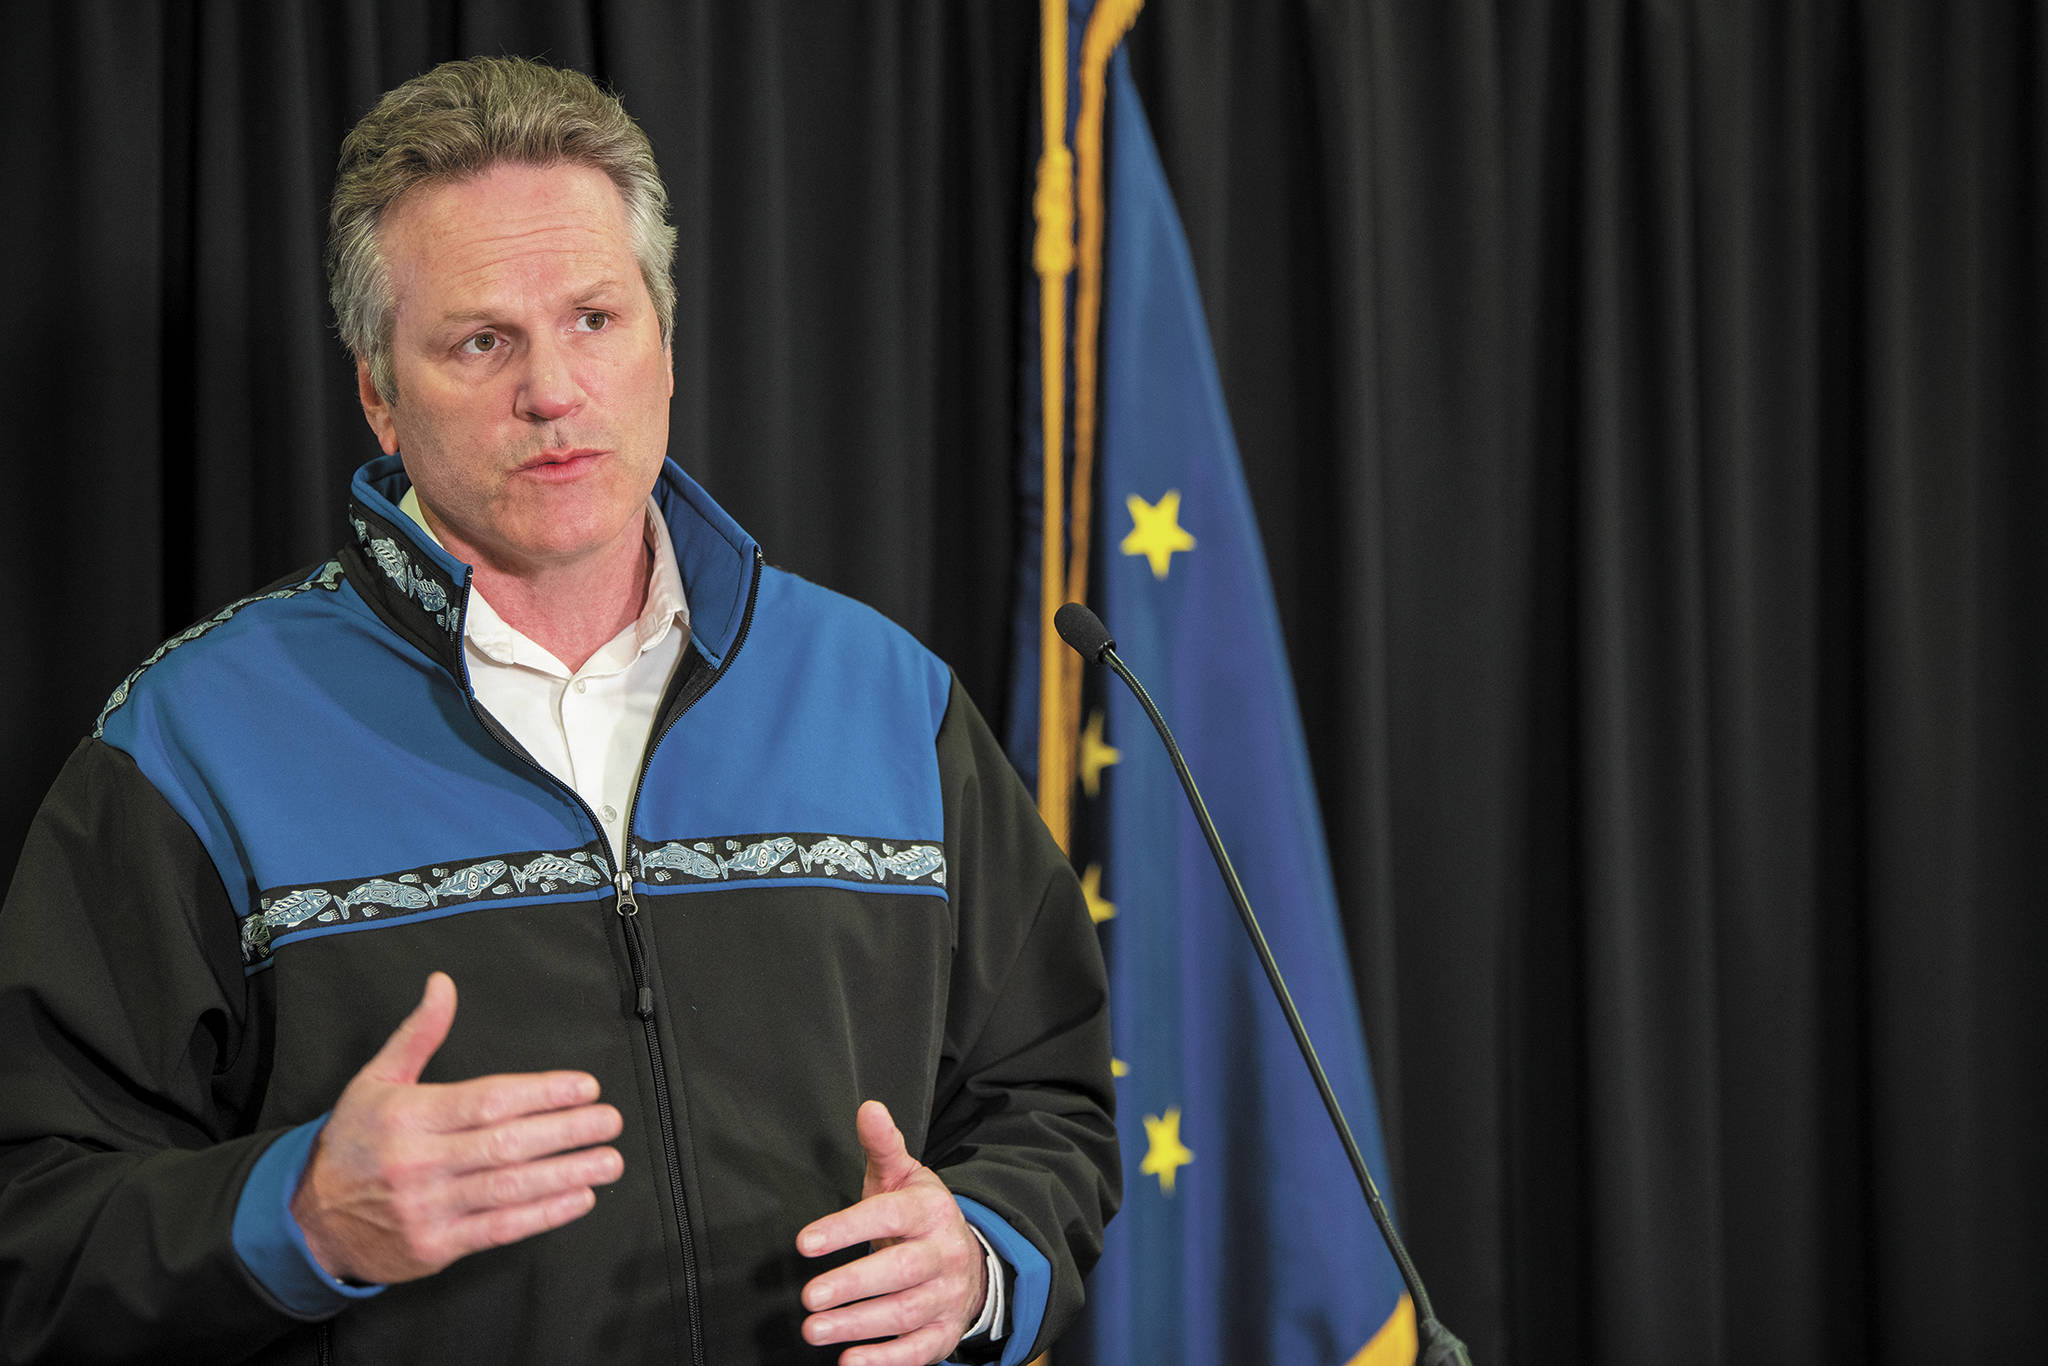 Gov. Mike Dunleavy speaks during a Friday, May 1, 2020 press conference in the Atwood Building in Anchorage, Alaska. (Photo courtesy Office of the Governor)